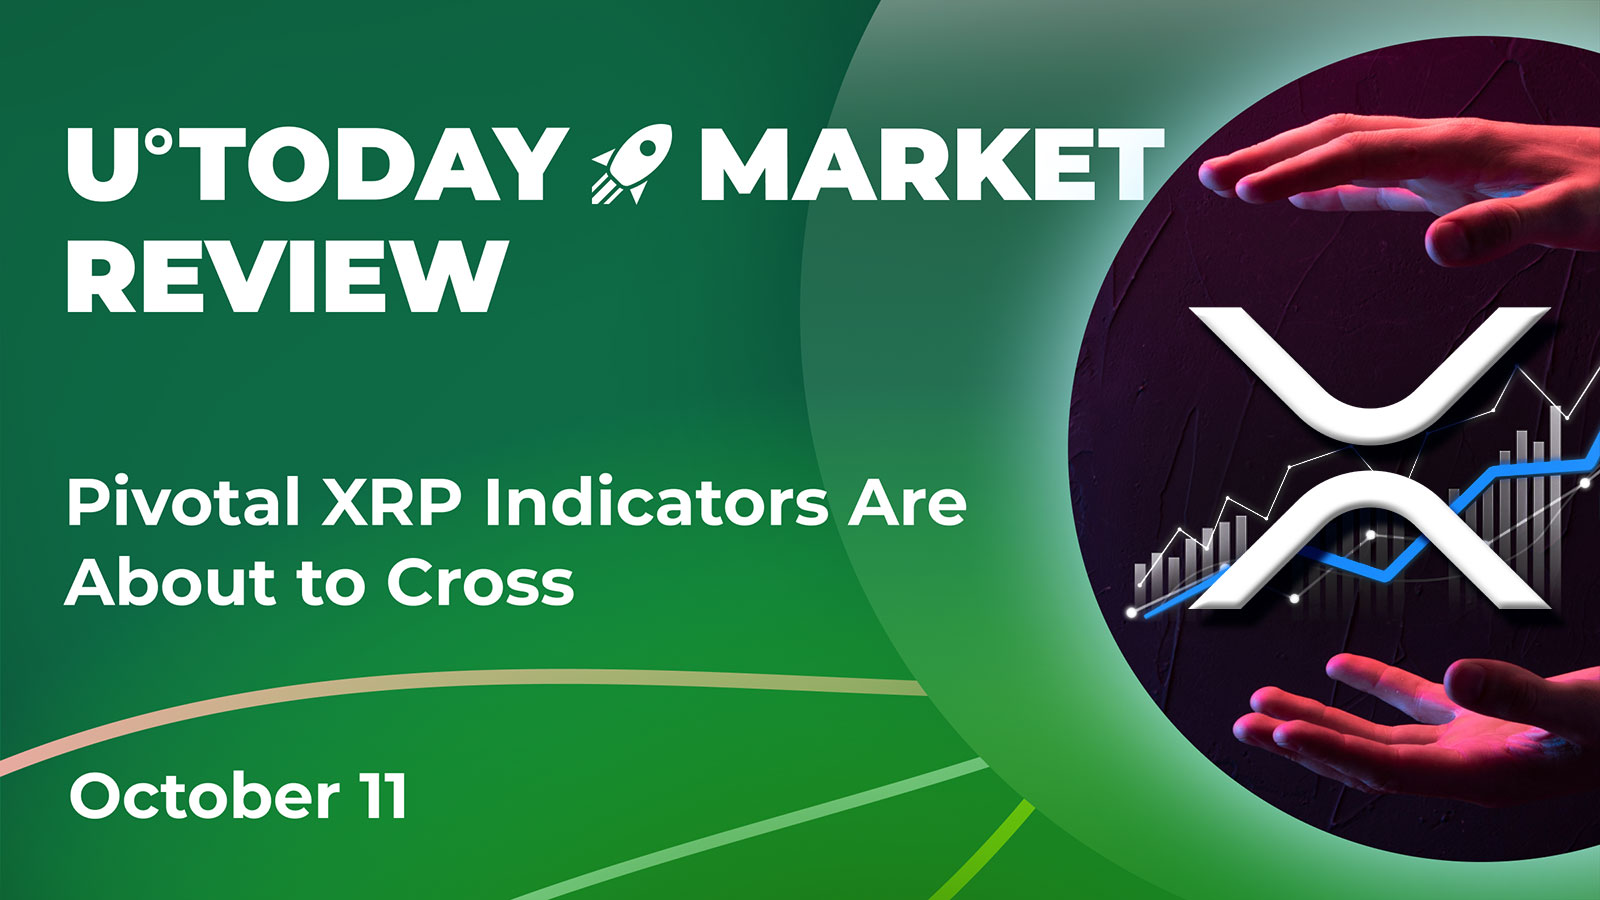 Pivotal XRP Indicators Are About to Cross: Crypto Market Review, October 11